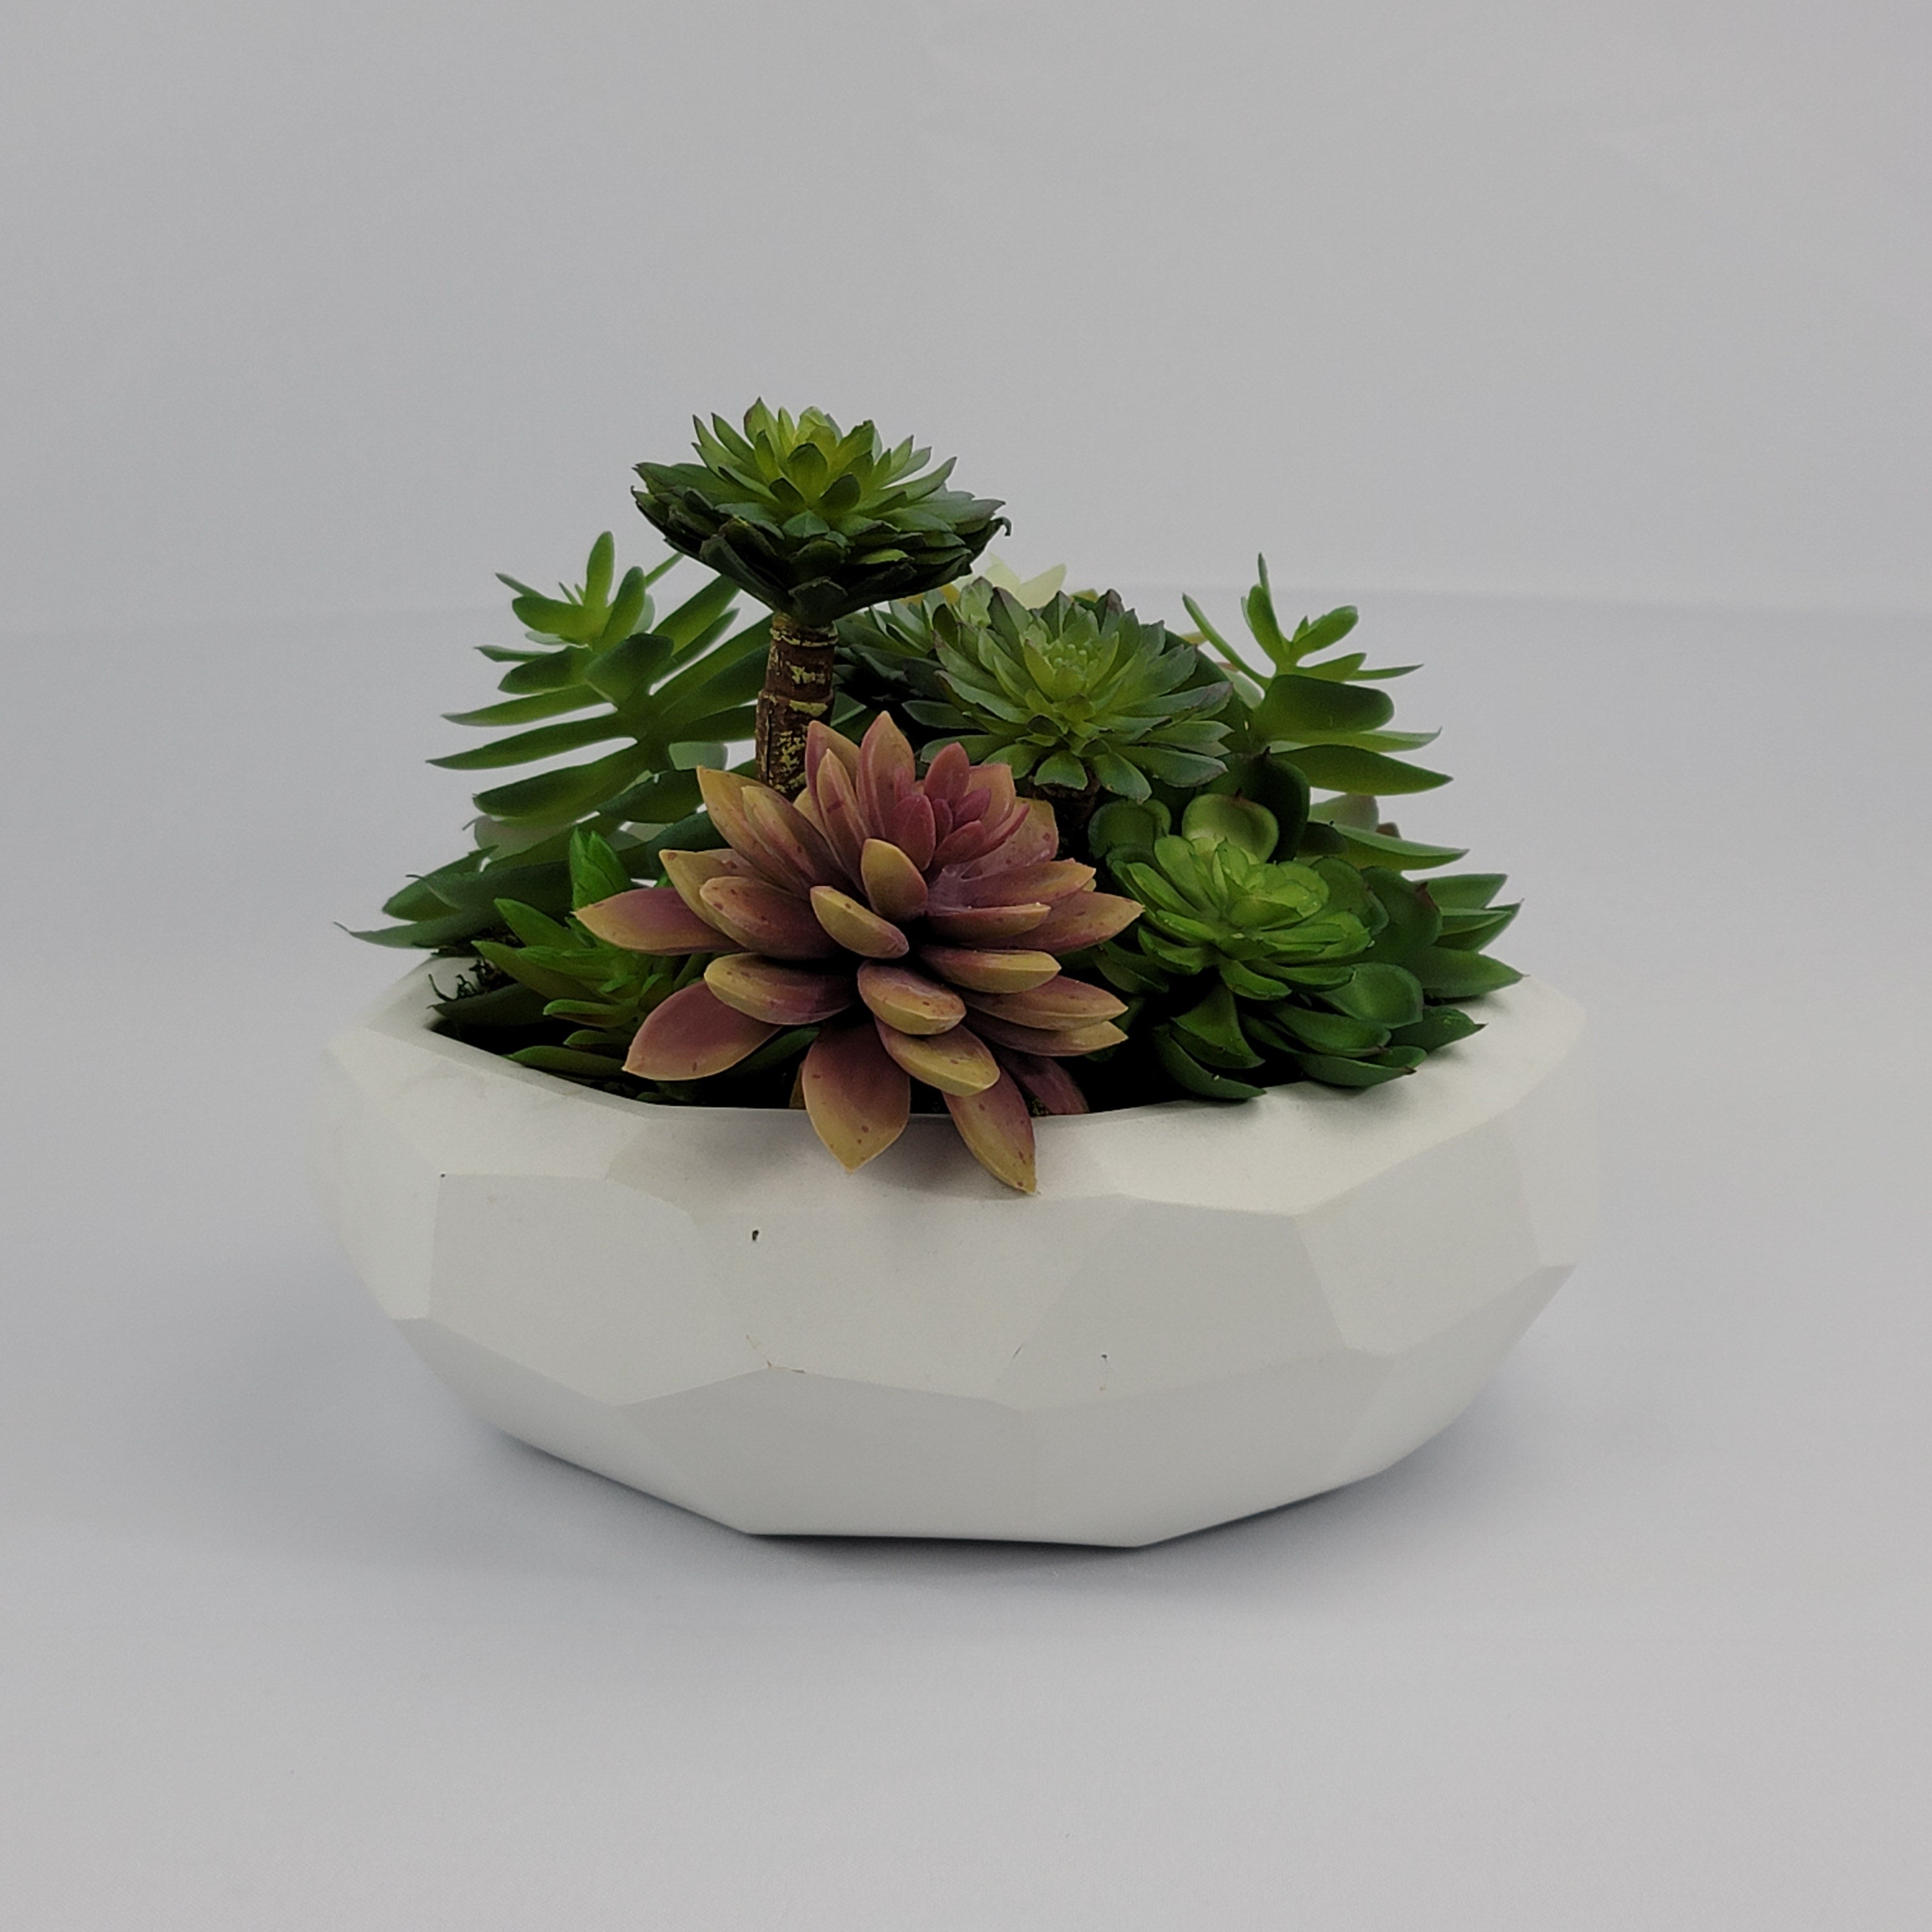 Faceted Bowl Planter - Gray